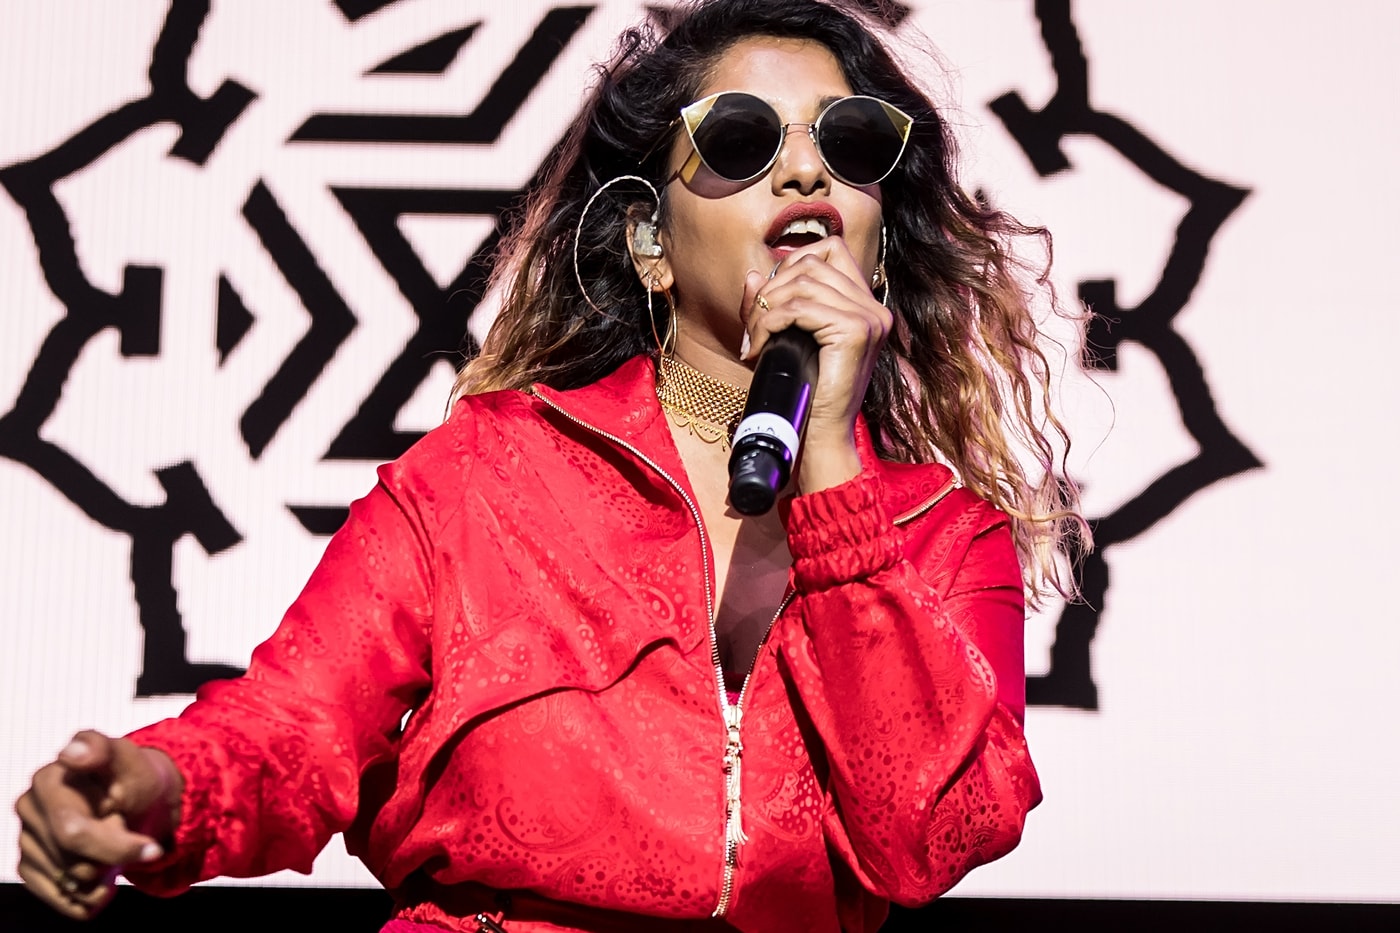 M.I.A. - Illy Girl (Video)